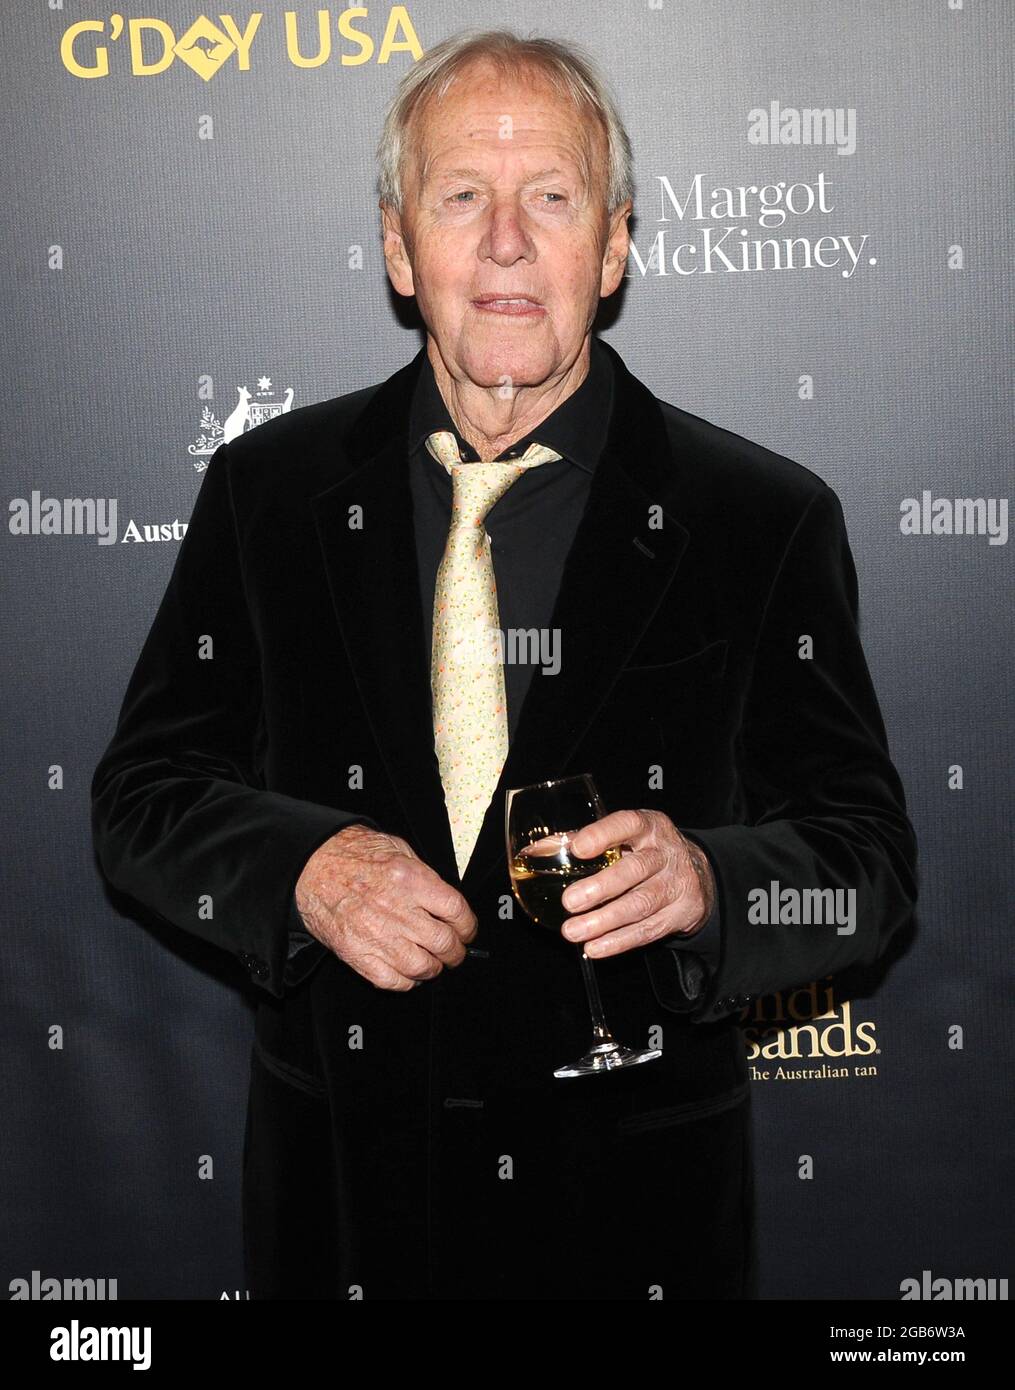 Udpakning Sump afregning Culver City, CA - 01/26/2019 16th annual G'Day USA Los Angeles Gala  -PICTURED: Paul Hogan -PHOTO by: Sara De Boer/startraksphoto.com -SDL 53068  Startraks Photo New York, NY For licensing please call 212-414-9464